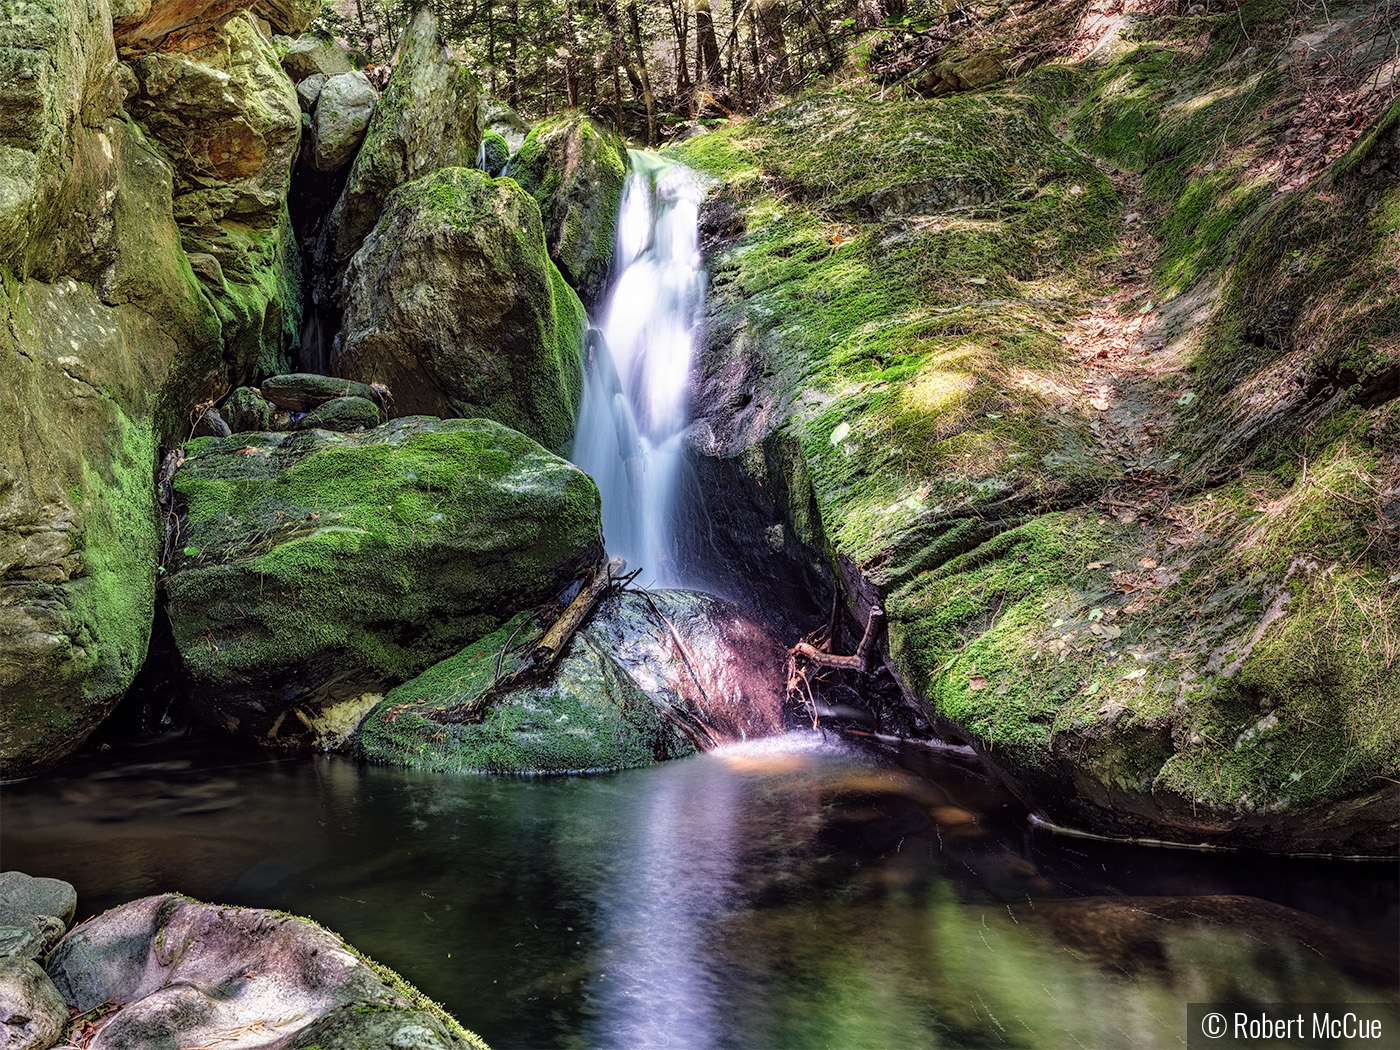 Waterfall at Sages Revine by Robert McCue